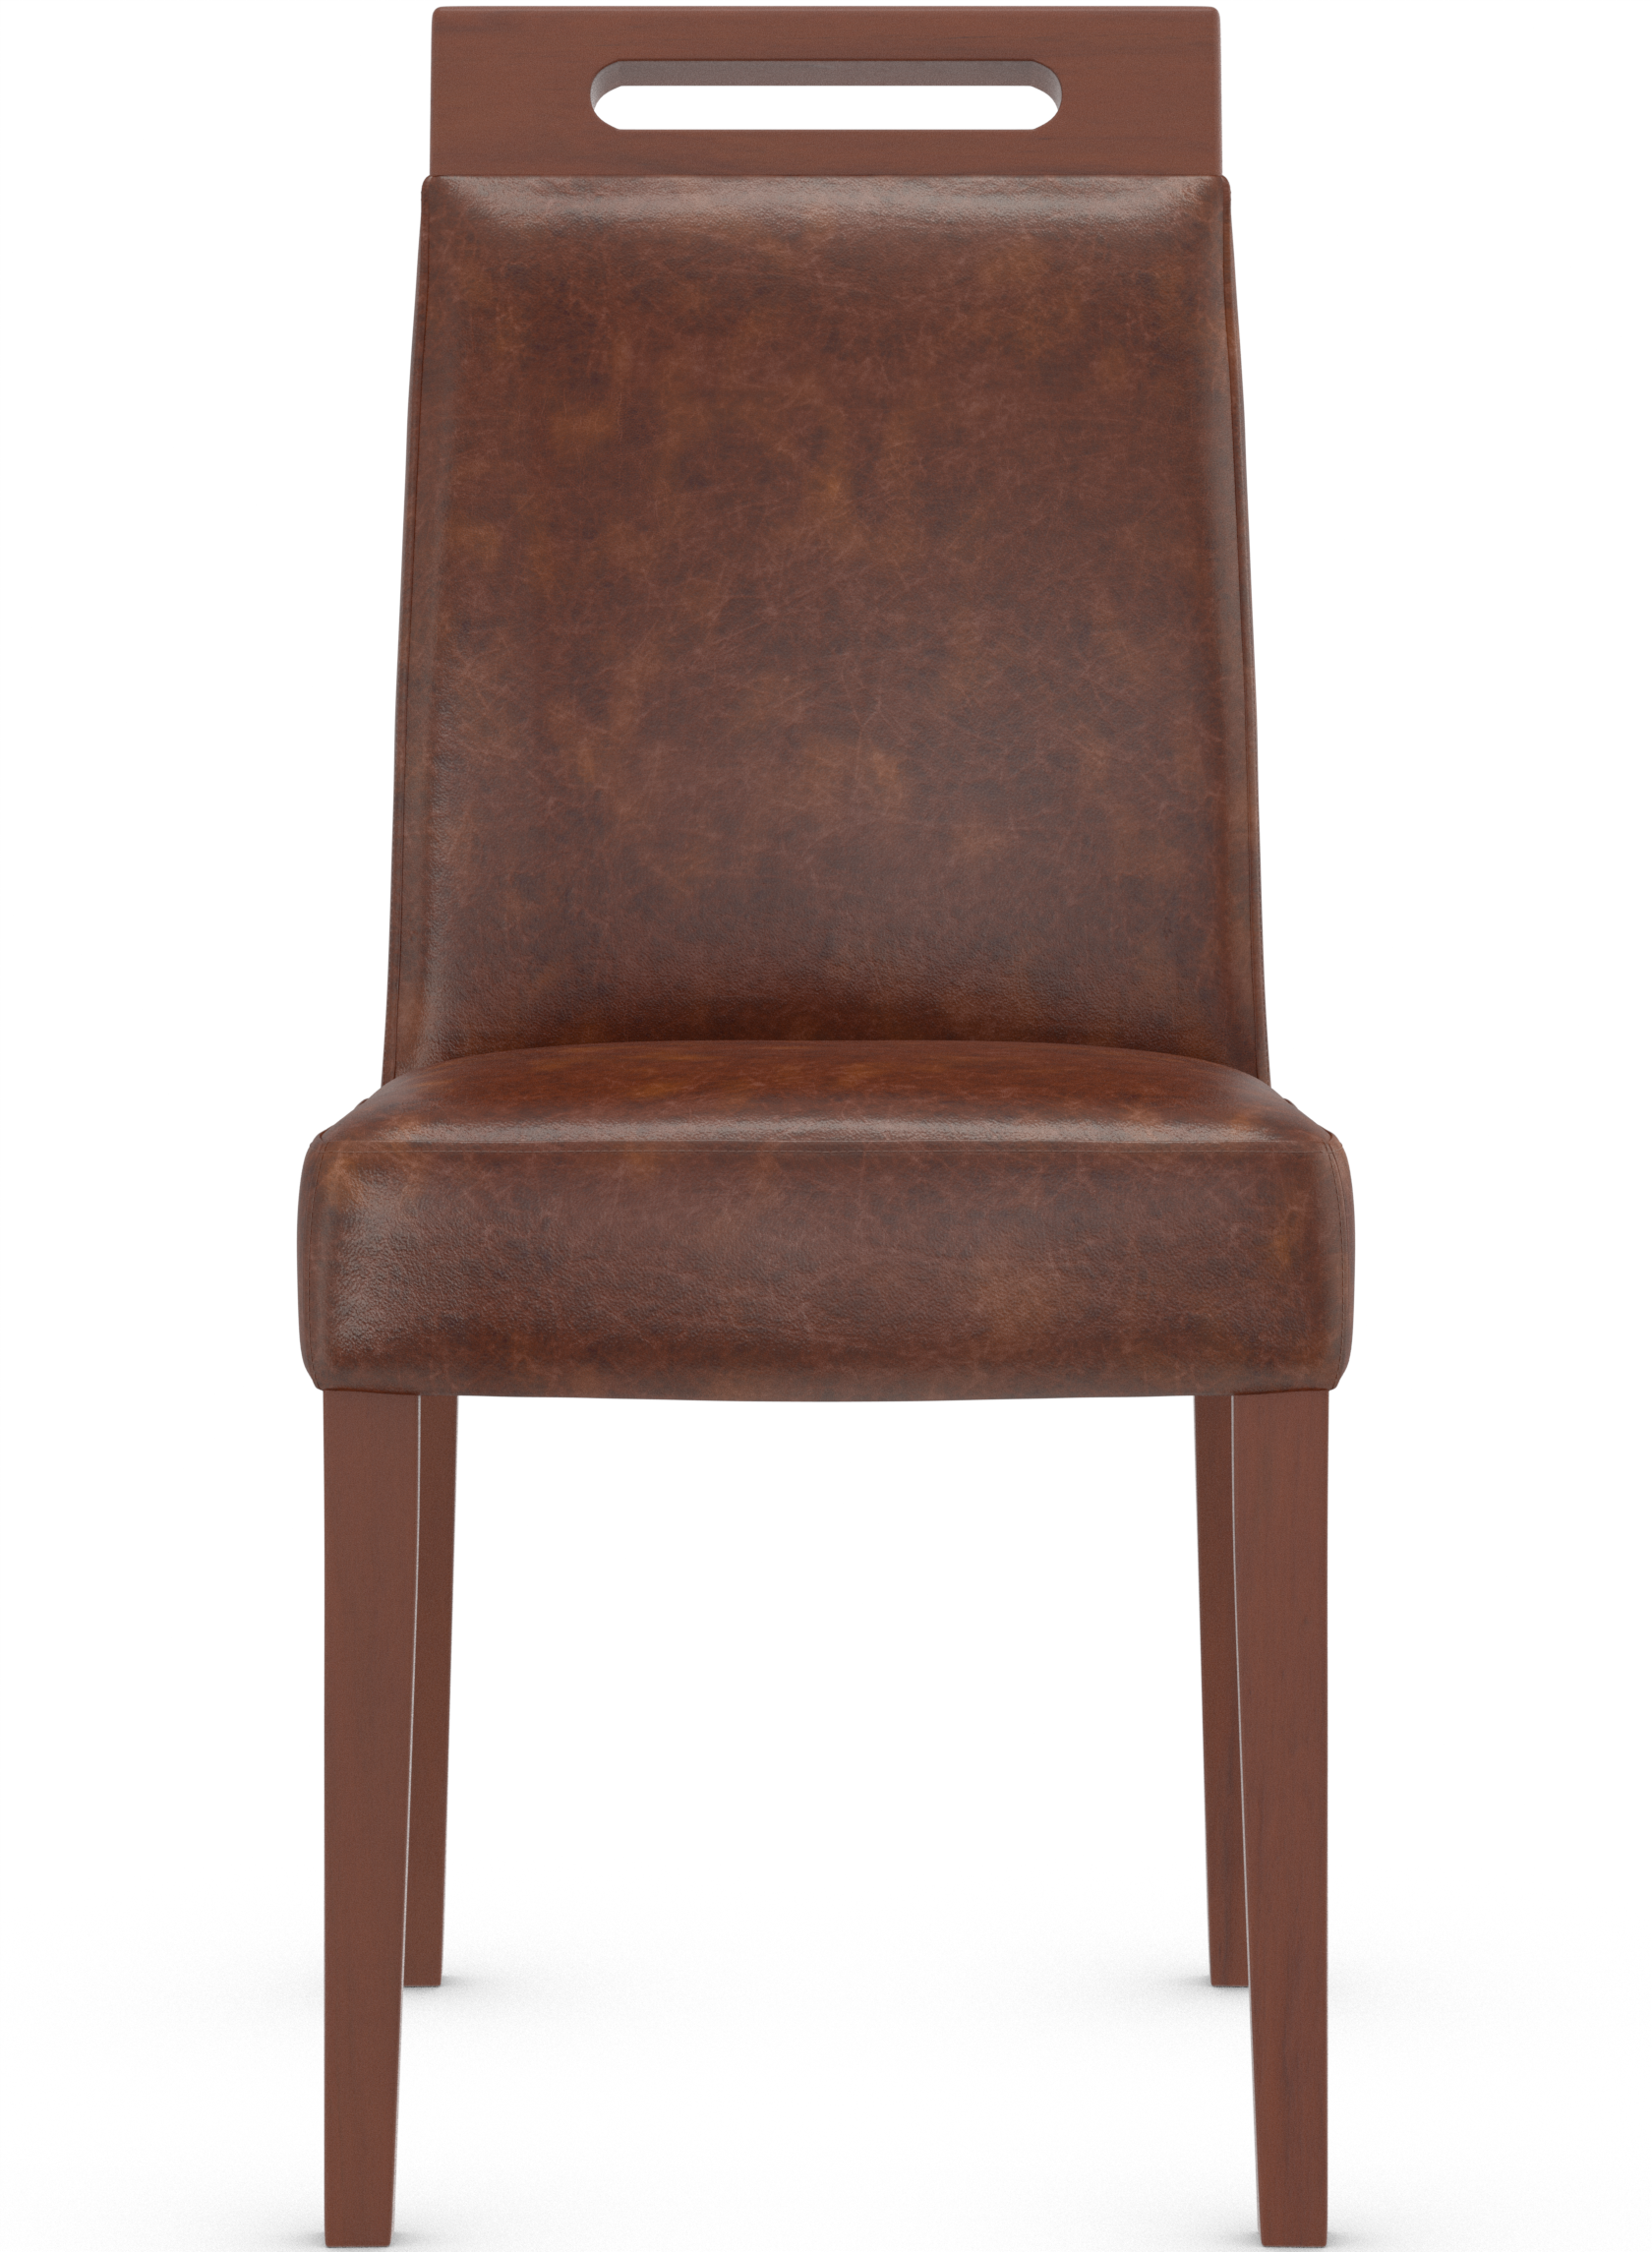 Modena Rustic Oak Dining Chair Aniline Leather